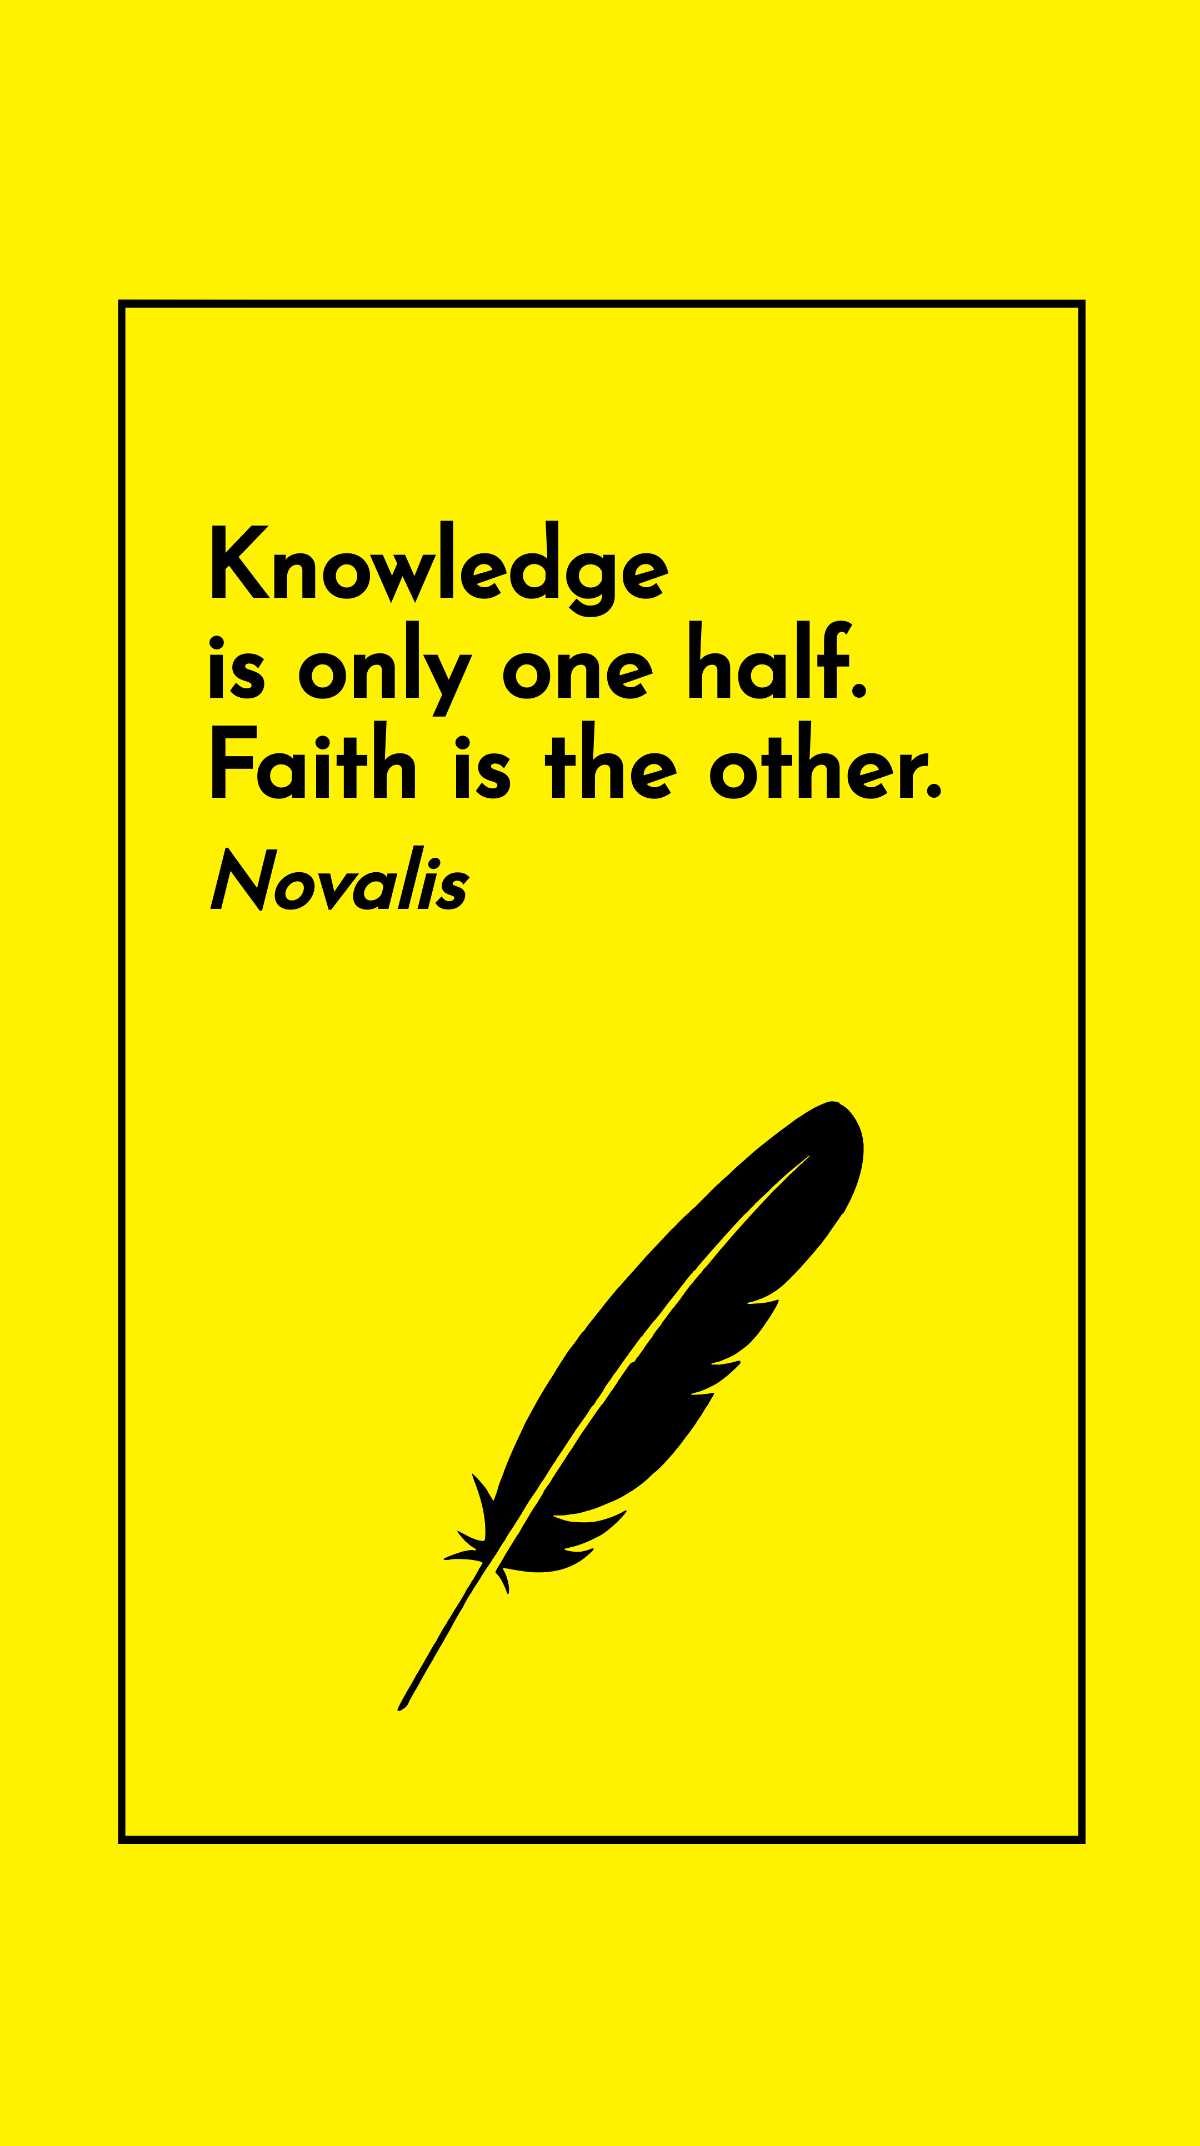 Novalis - Knowledge is only one half. Faith is the other. Template